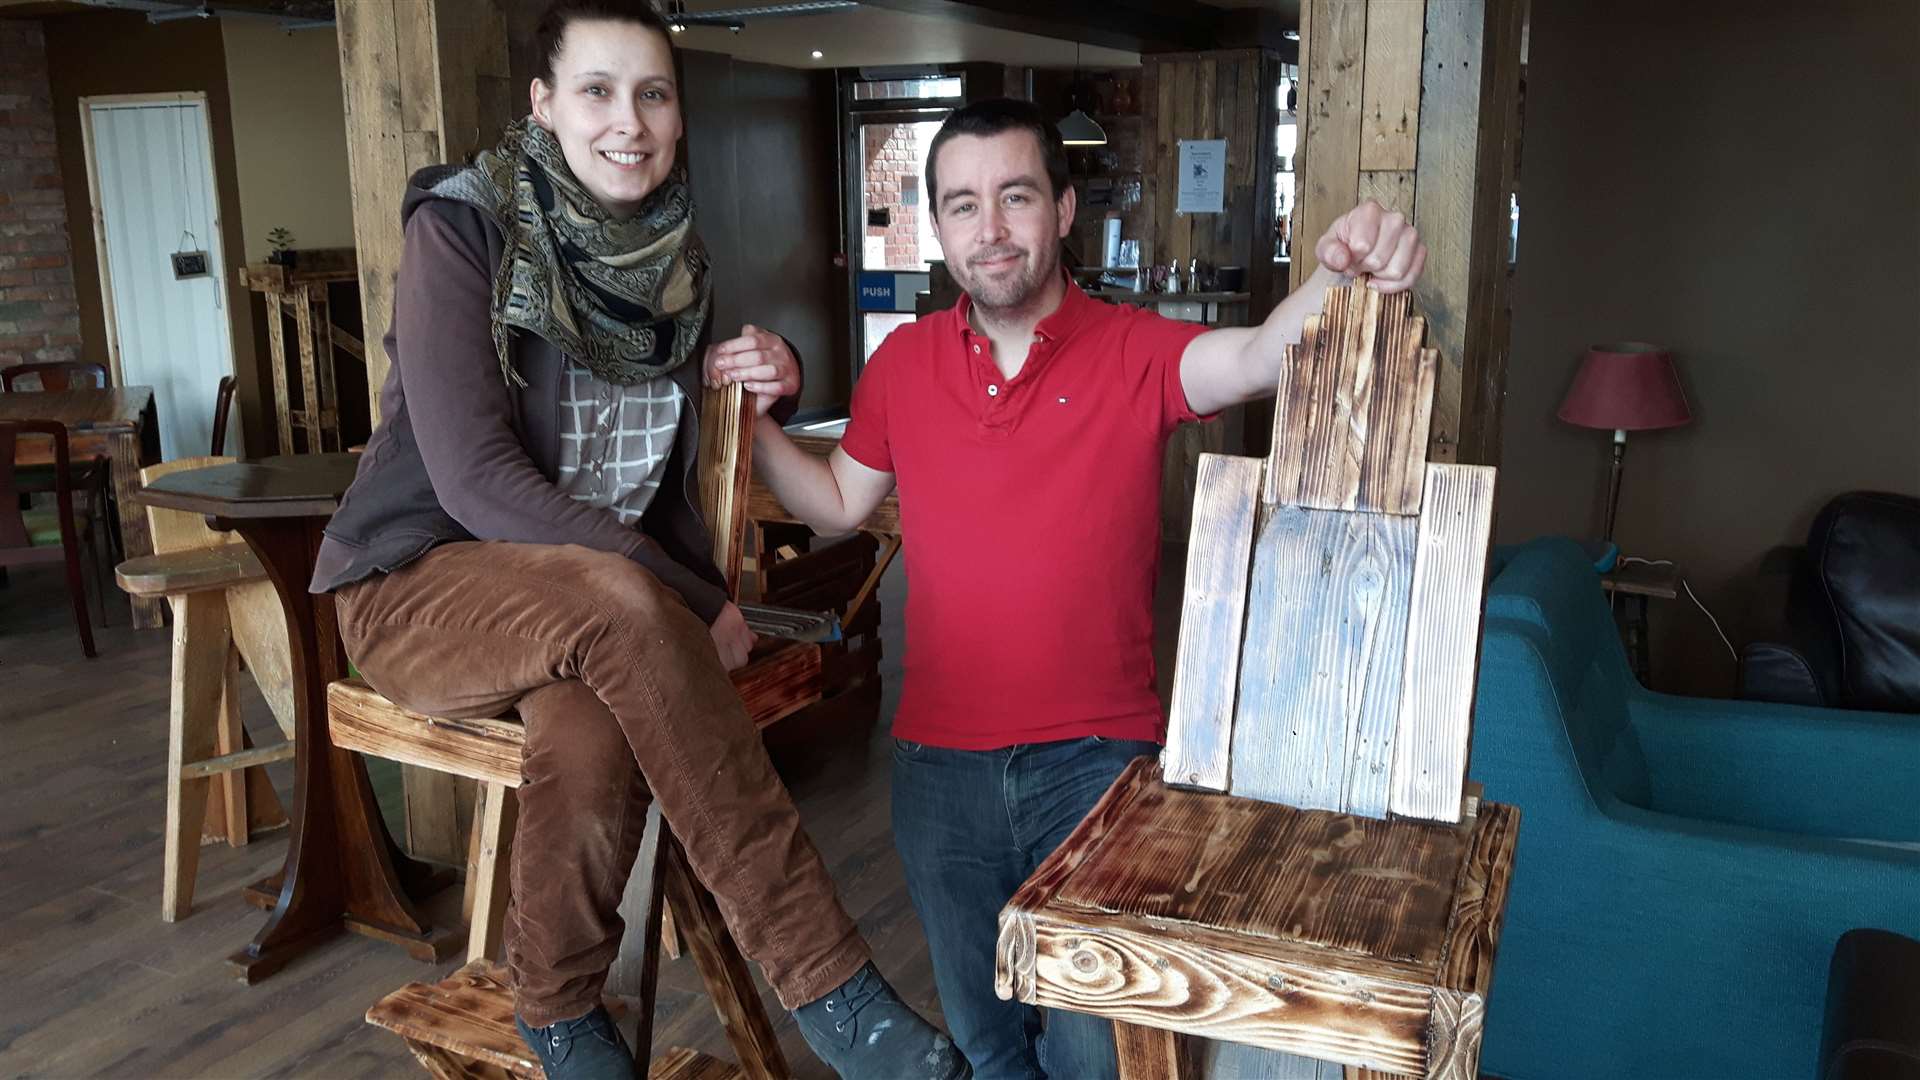 George Spencer and Sandra lemke of Matesone Coffee Bar with their hand-made furniture